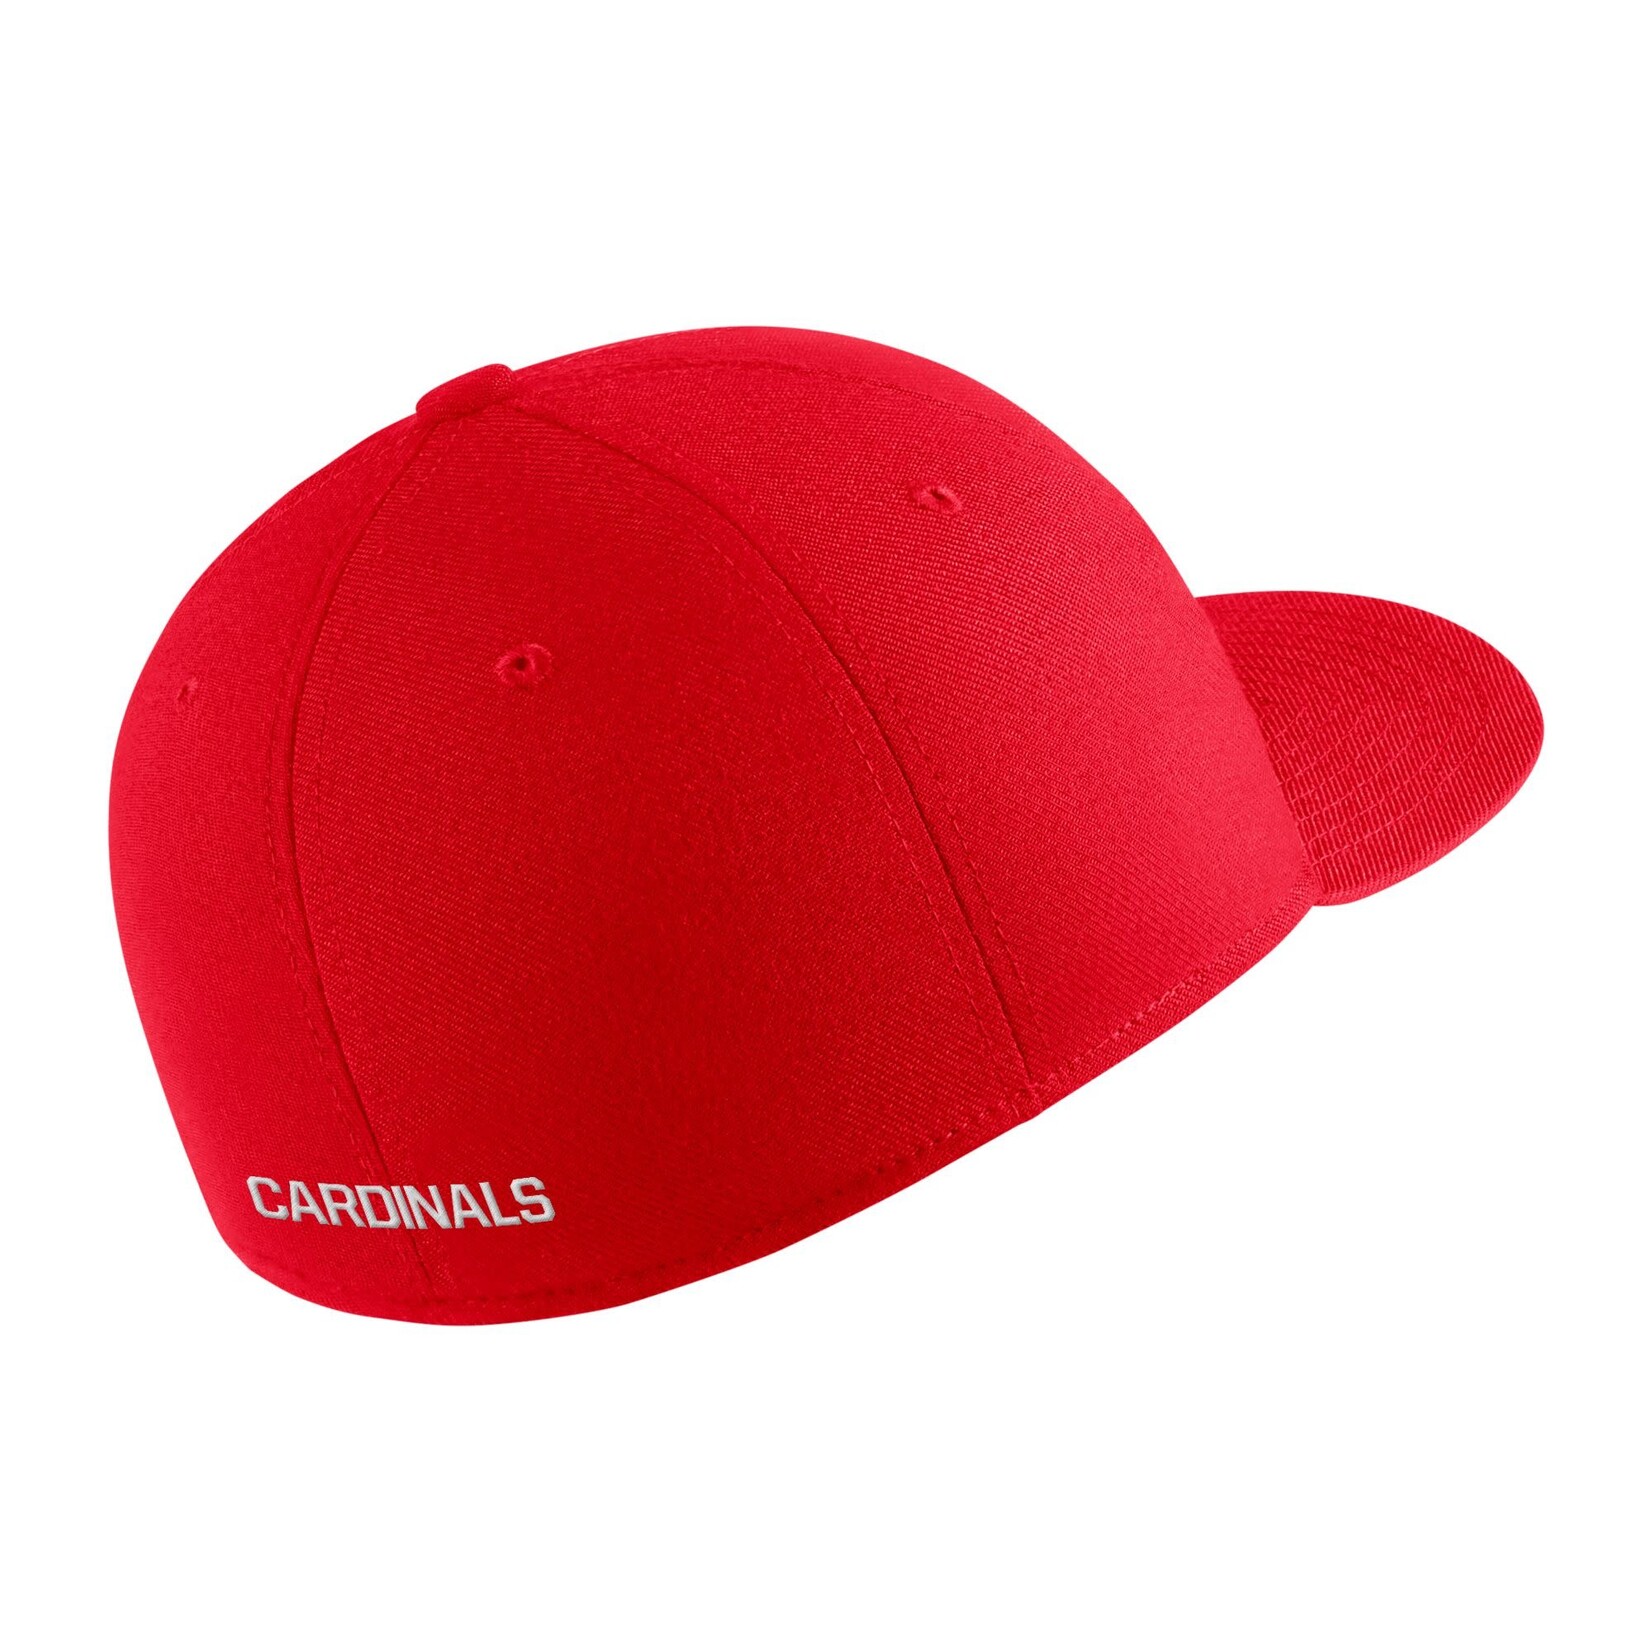 Nike North Central College Swoosh Flex Classic Hat by Nike